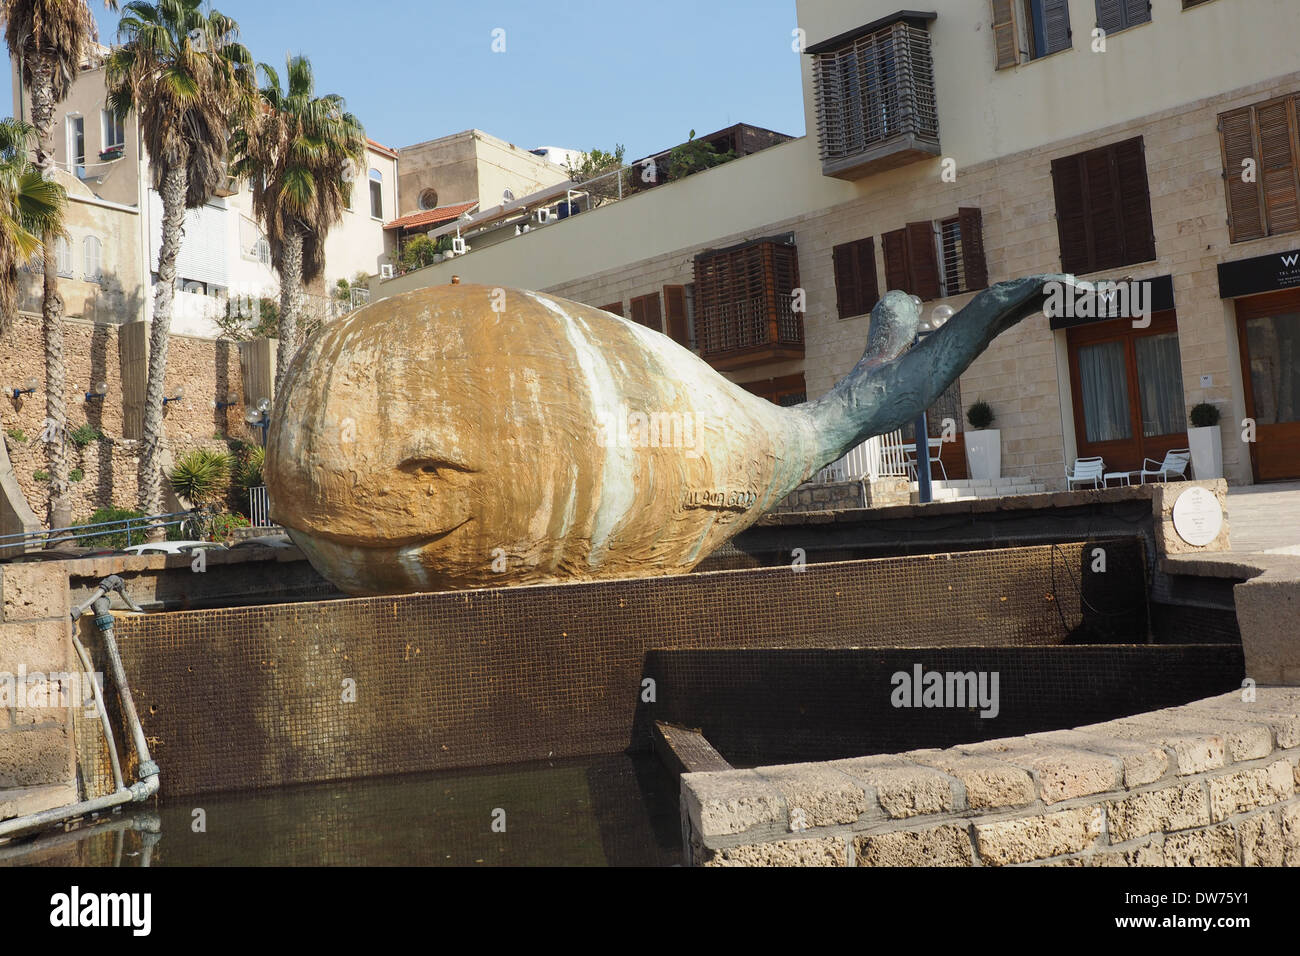 The whale that swallowed Jonah sculpture in Jaffa, Israel. Stock Photo